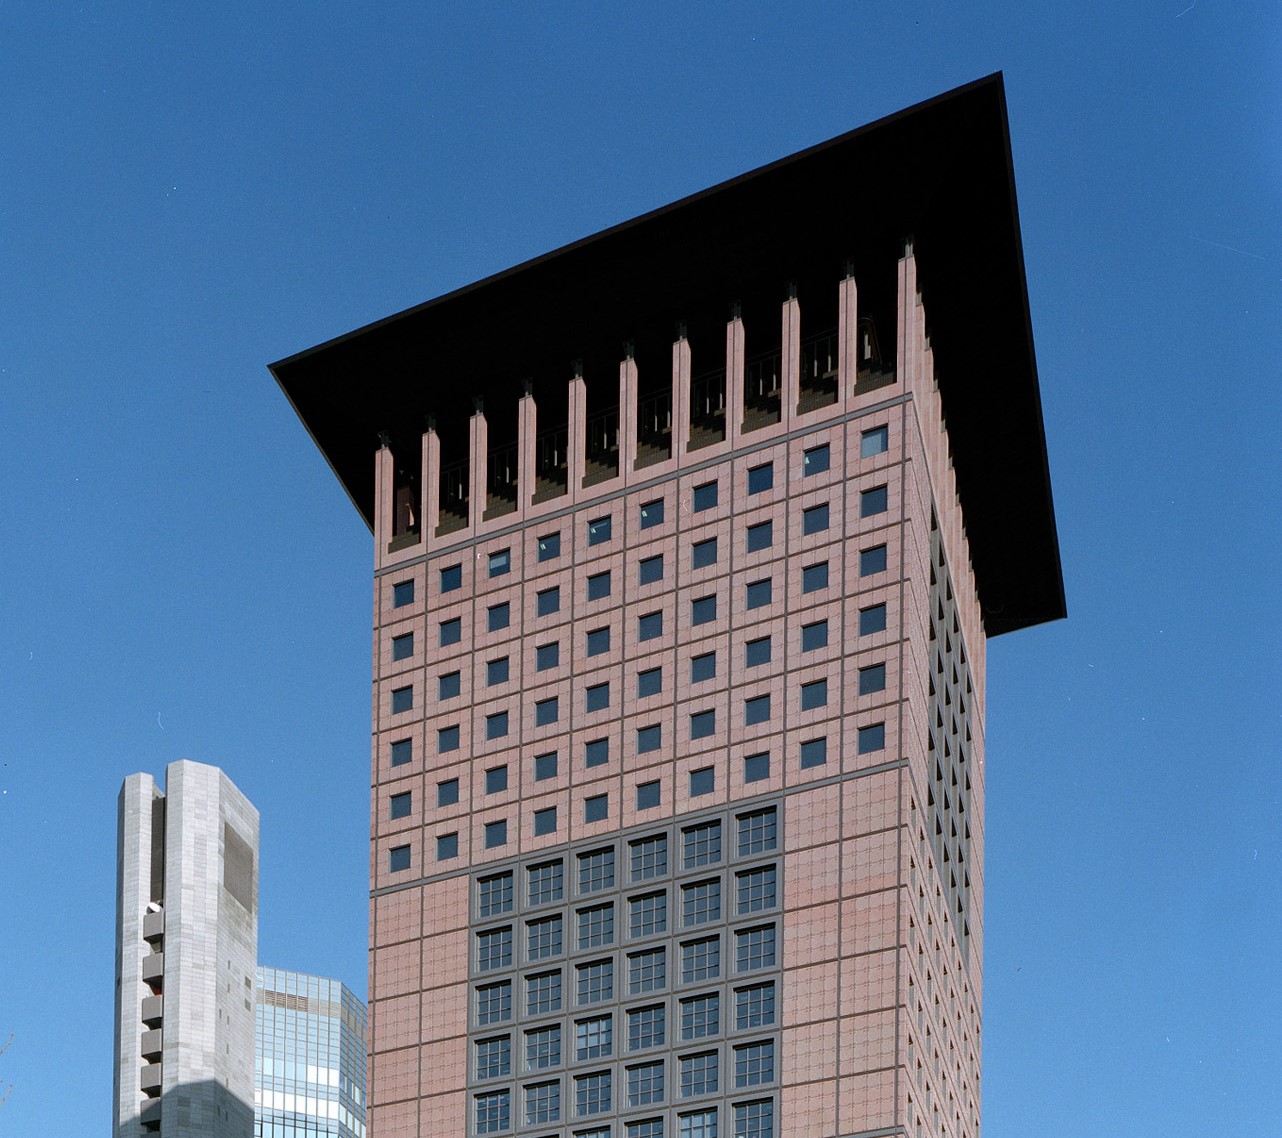 Japan Center in Frankfurt am Main with striking roof design and red façade against a blue sky.